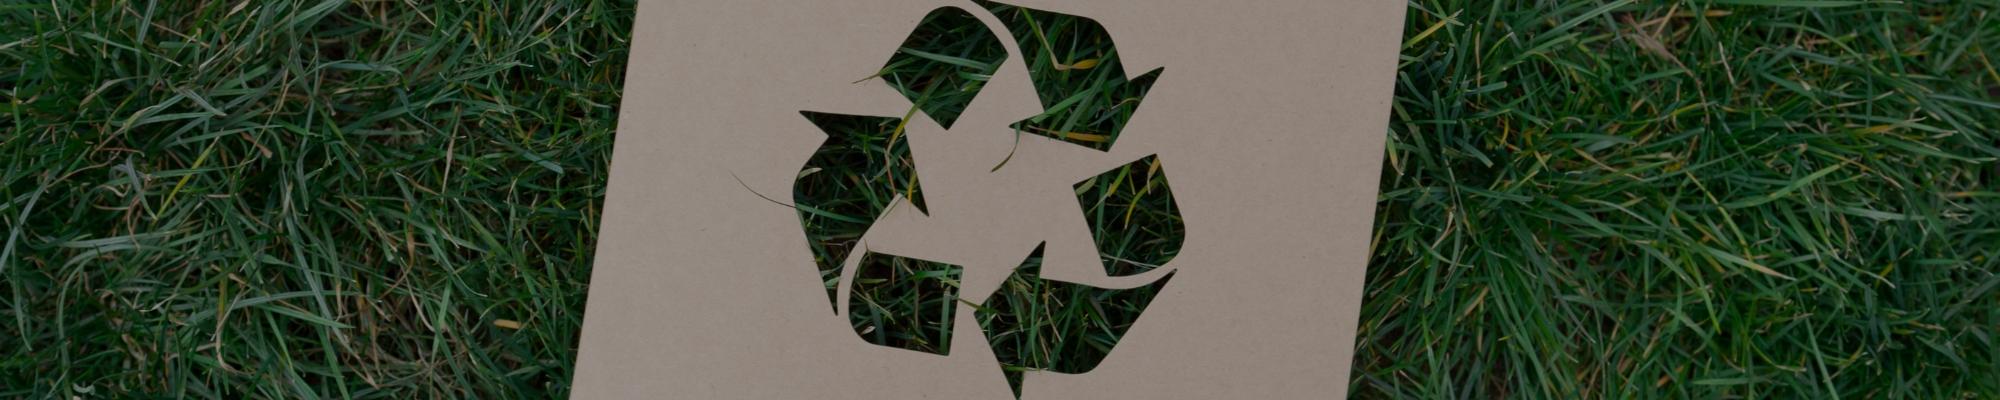 Recycling symbol cut out of cardboard on grass.